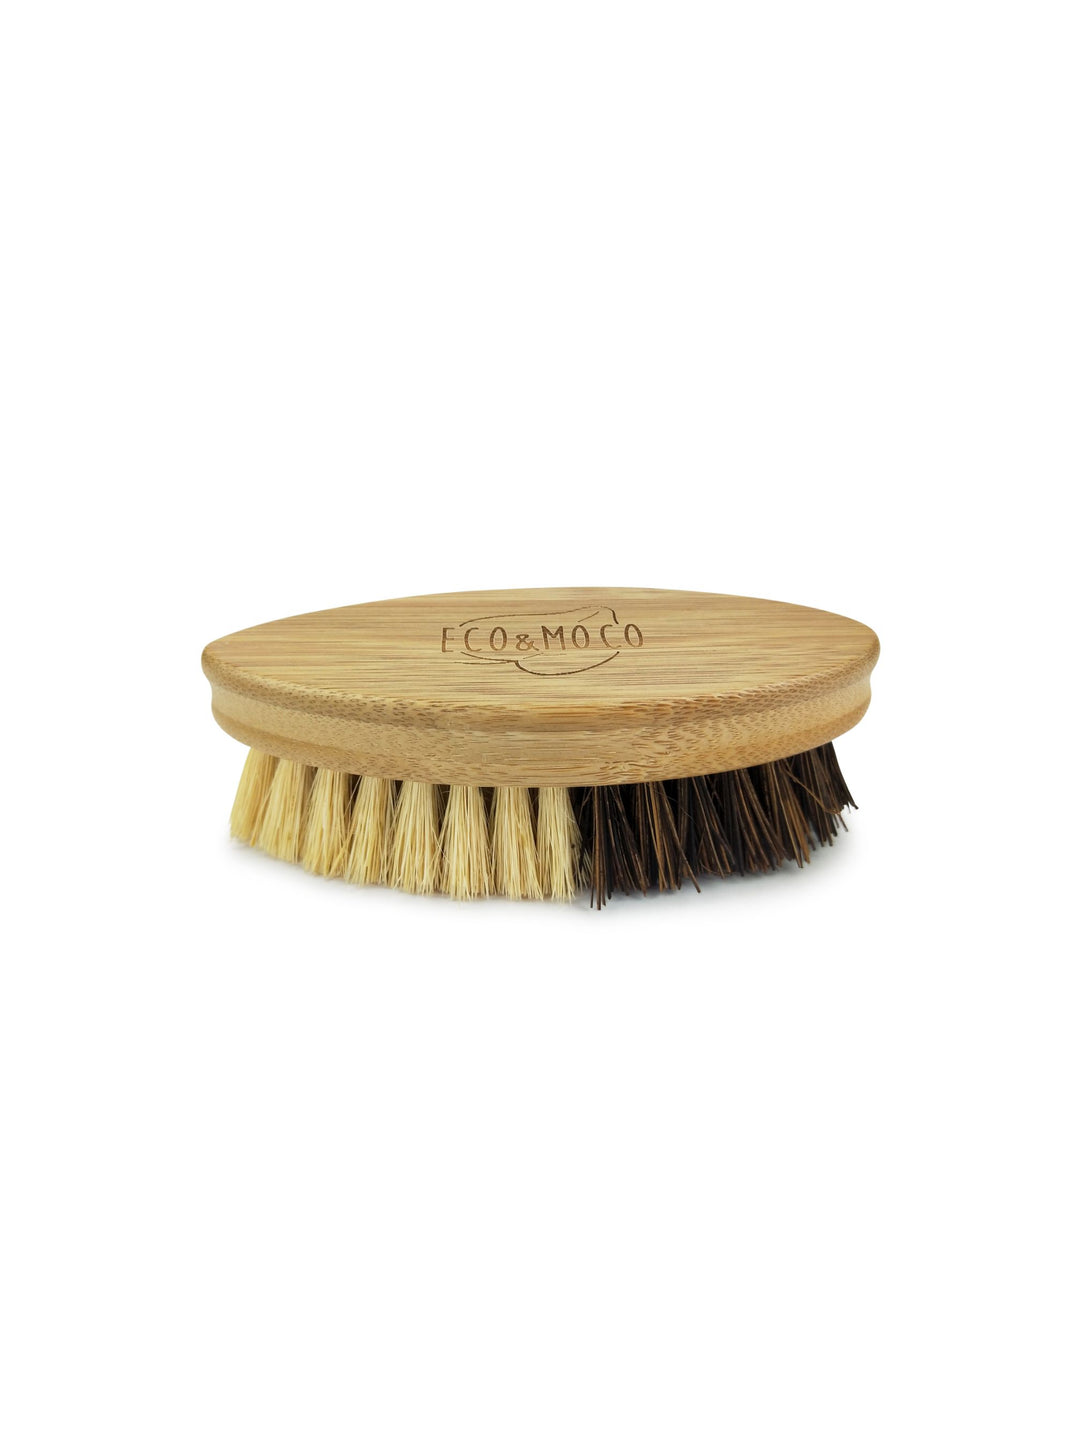 Cleaning Scrubber Brush from Eco and Moco